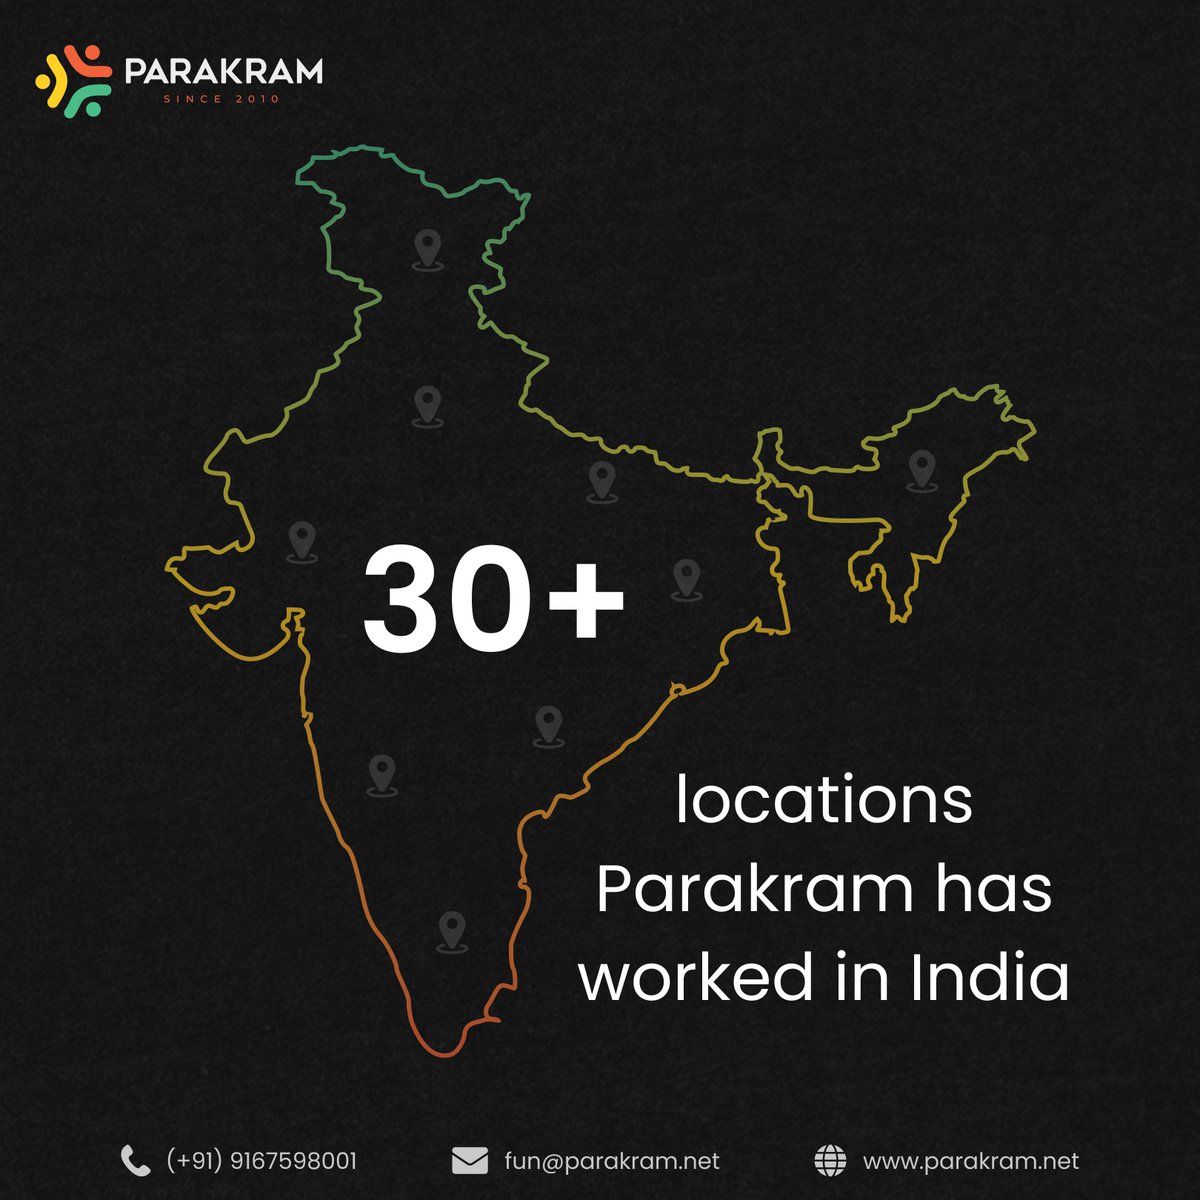 Mapping Parakram's journey across India! We've touched 30+ locations, from major cities to emerging tech centers. Check out our impact map! 📍 #ParakramInIndia #TechExpansion #IndianInnovation #MetroTech #NationwidePresence #DigitalGrowth #TechDiversity #LocalImpact